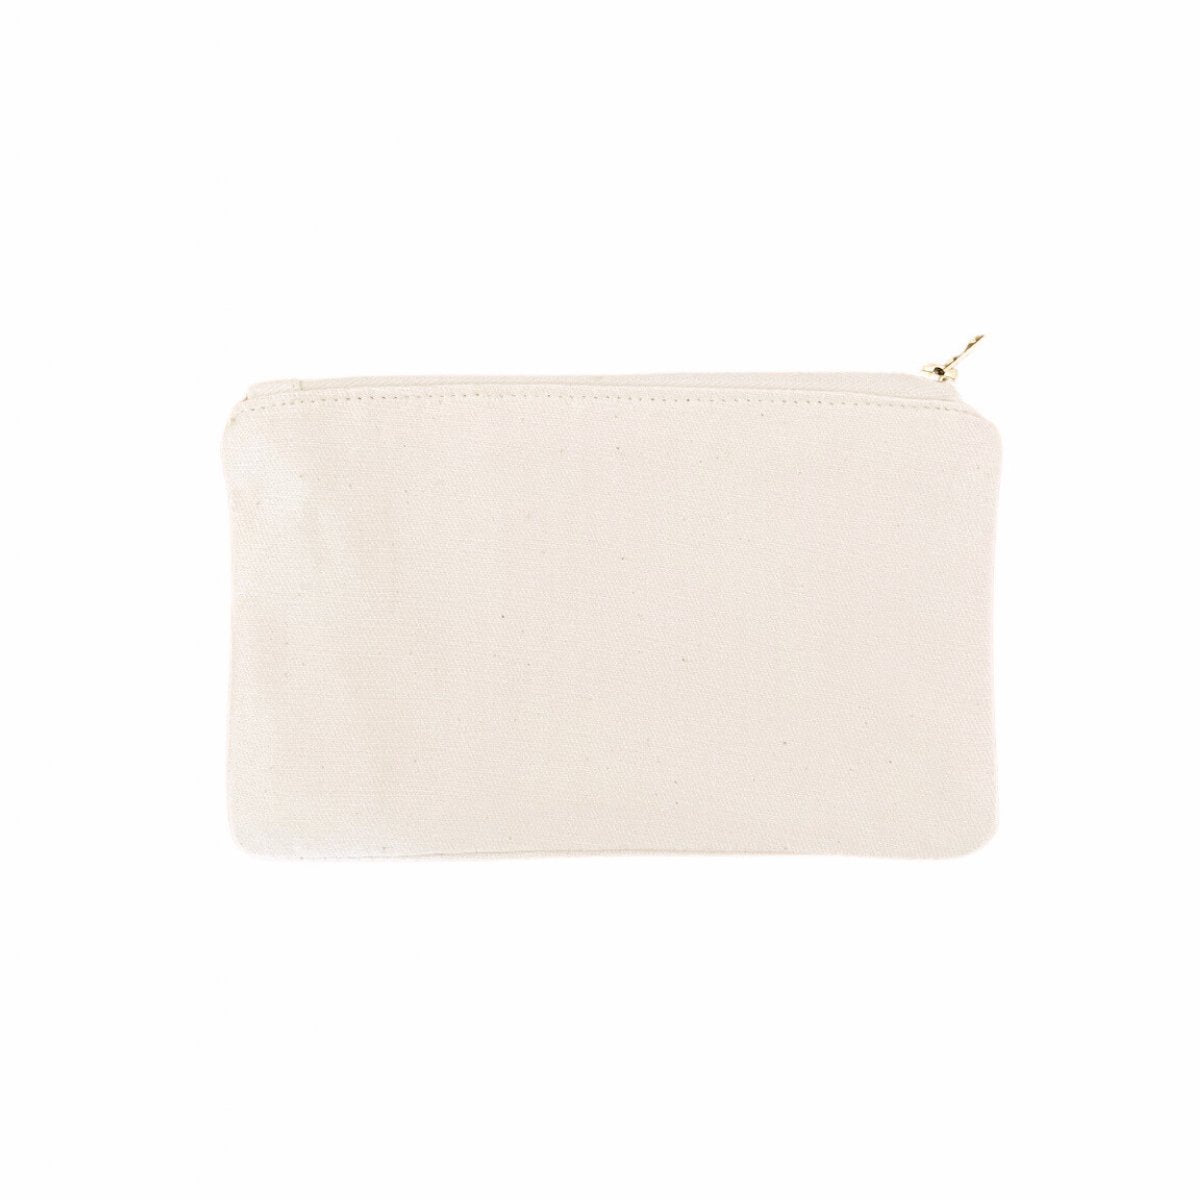 Imani Collective Blank Canvas Pouch with Brass Zipper - lily & onyx